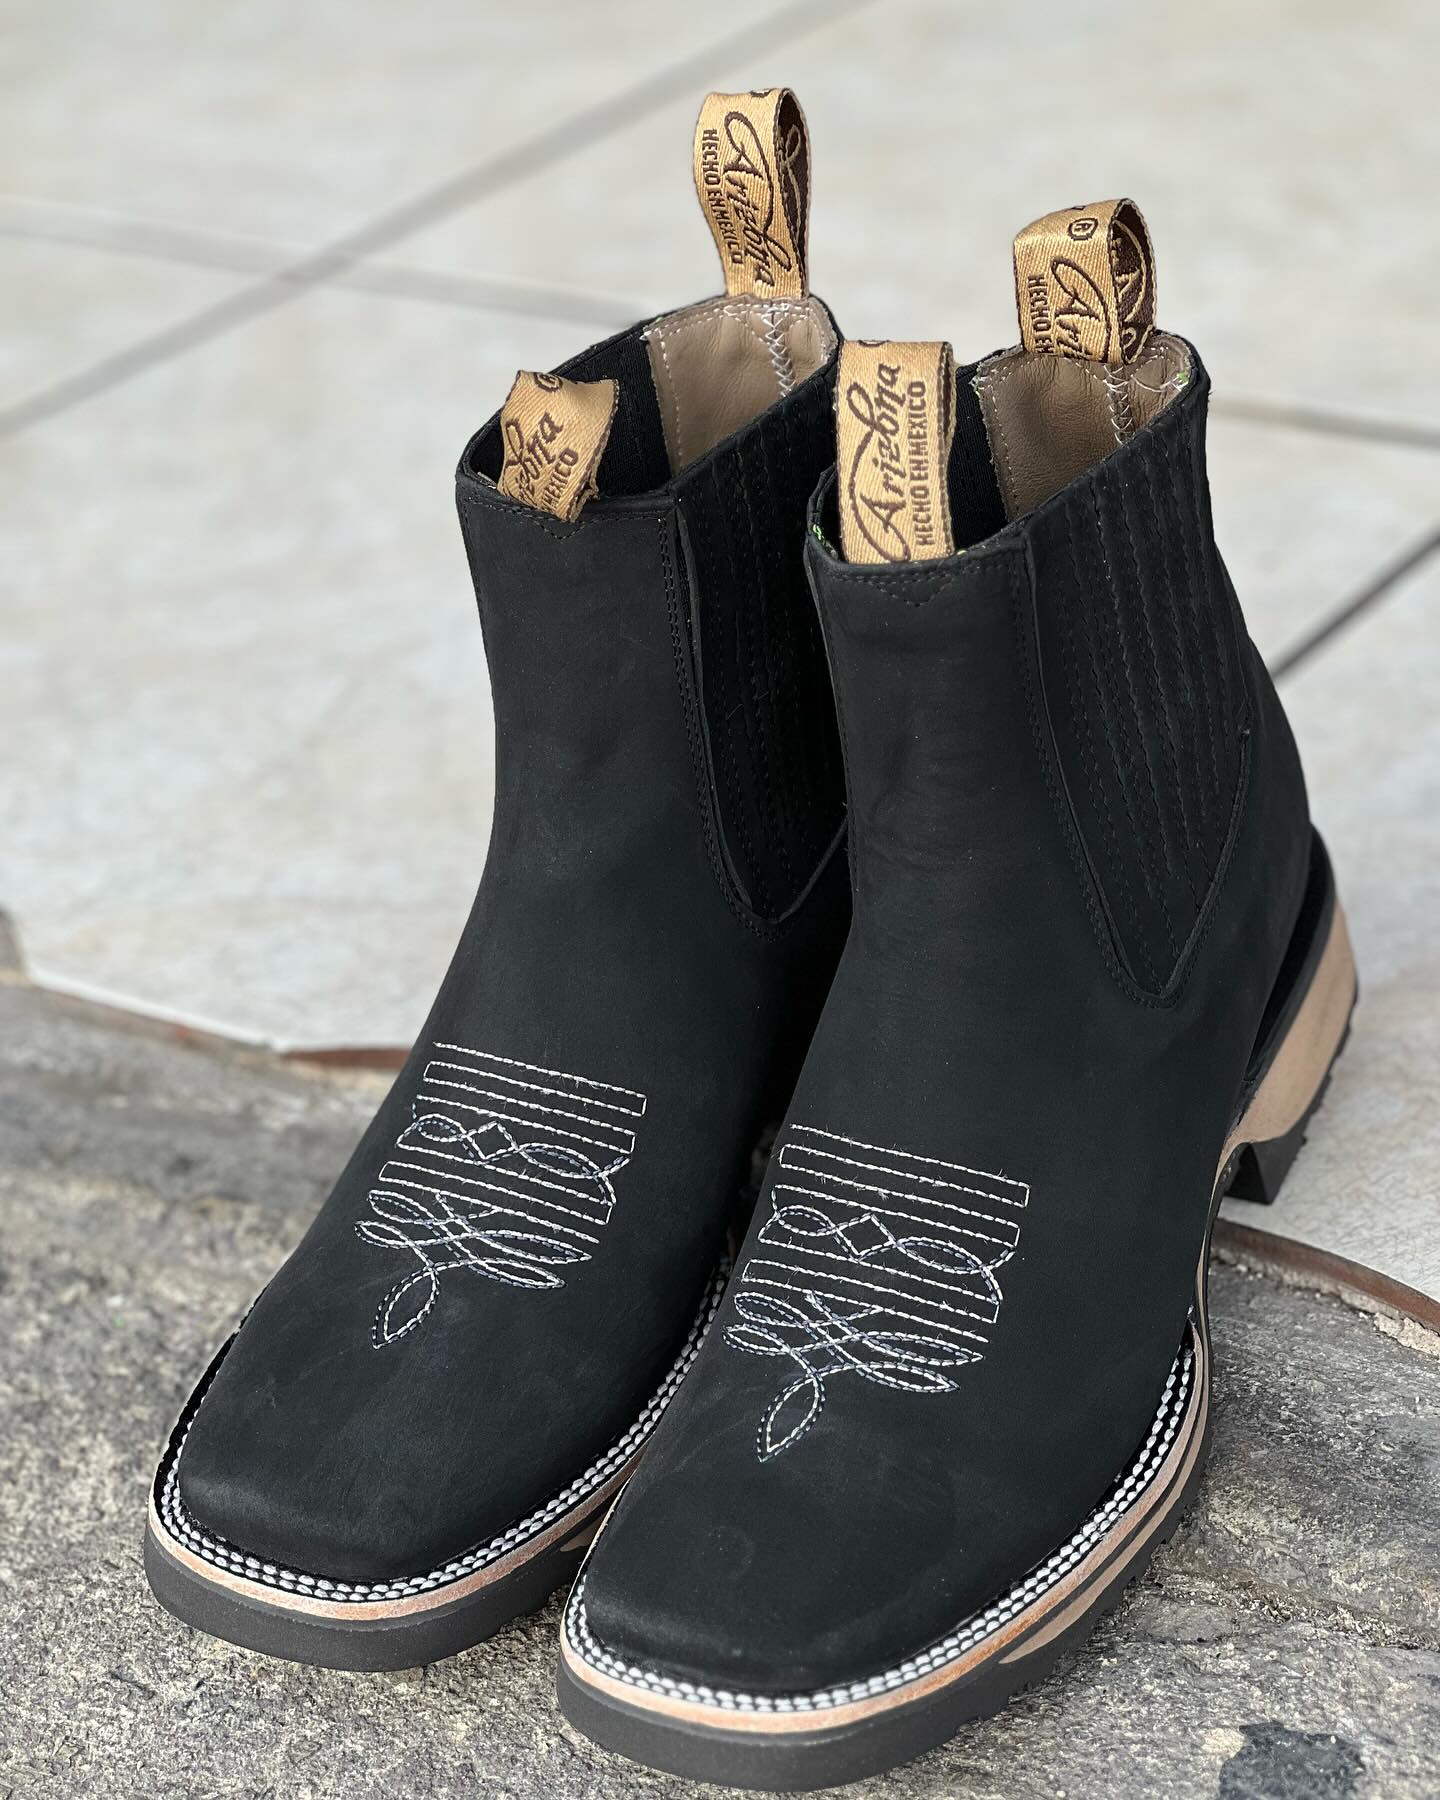 The Earl Ave Boots